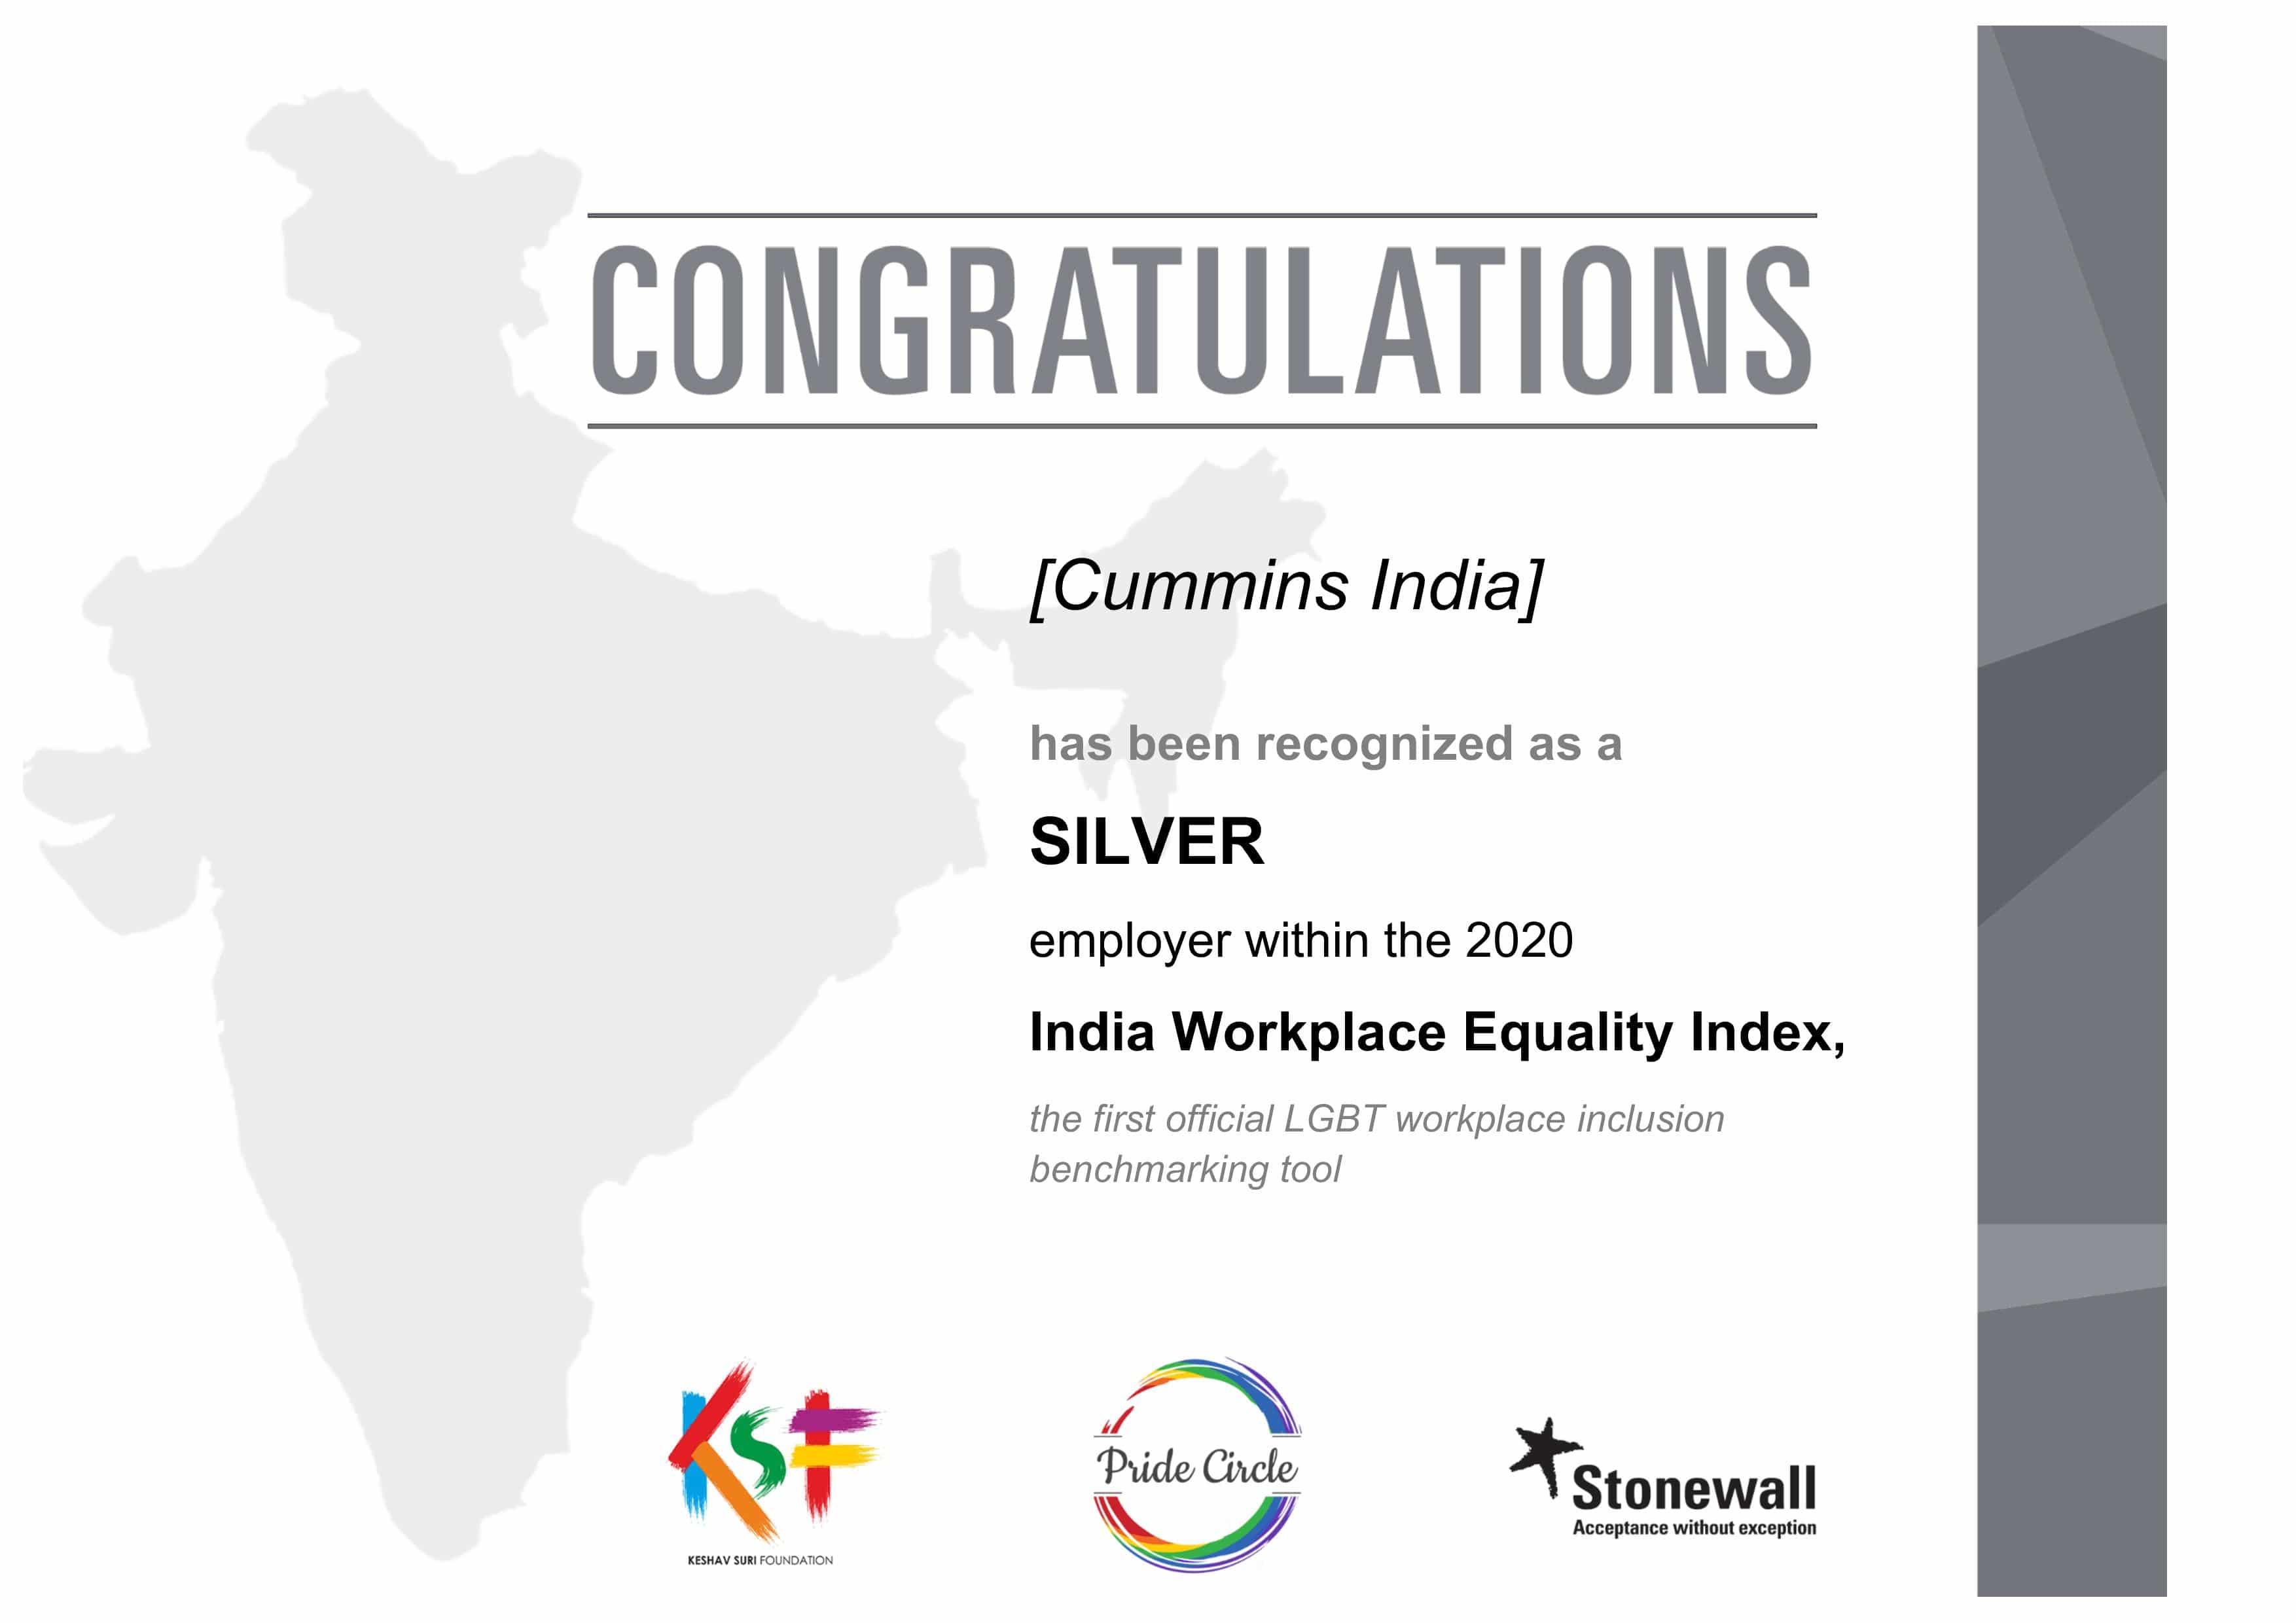 cummins-india-has-been-recognized-as-a-silver-employer-within-the-2020-india-workplace